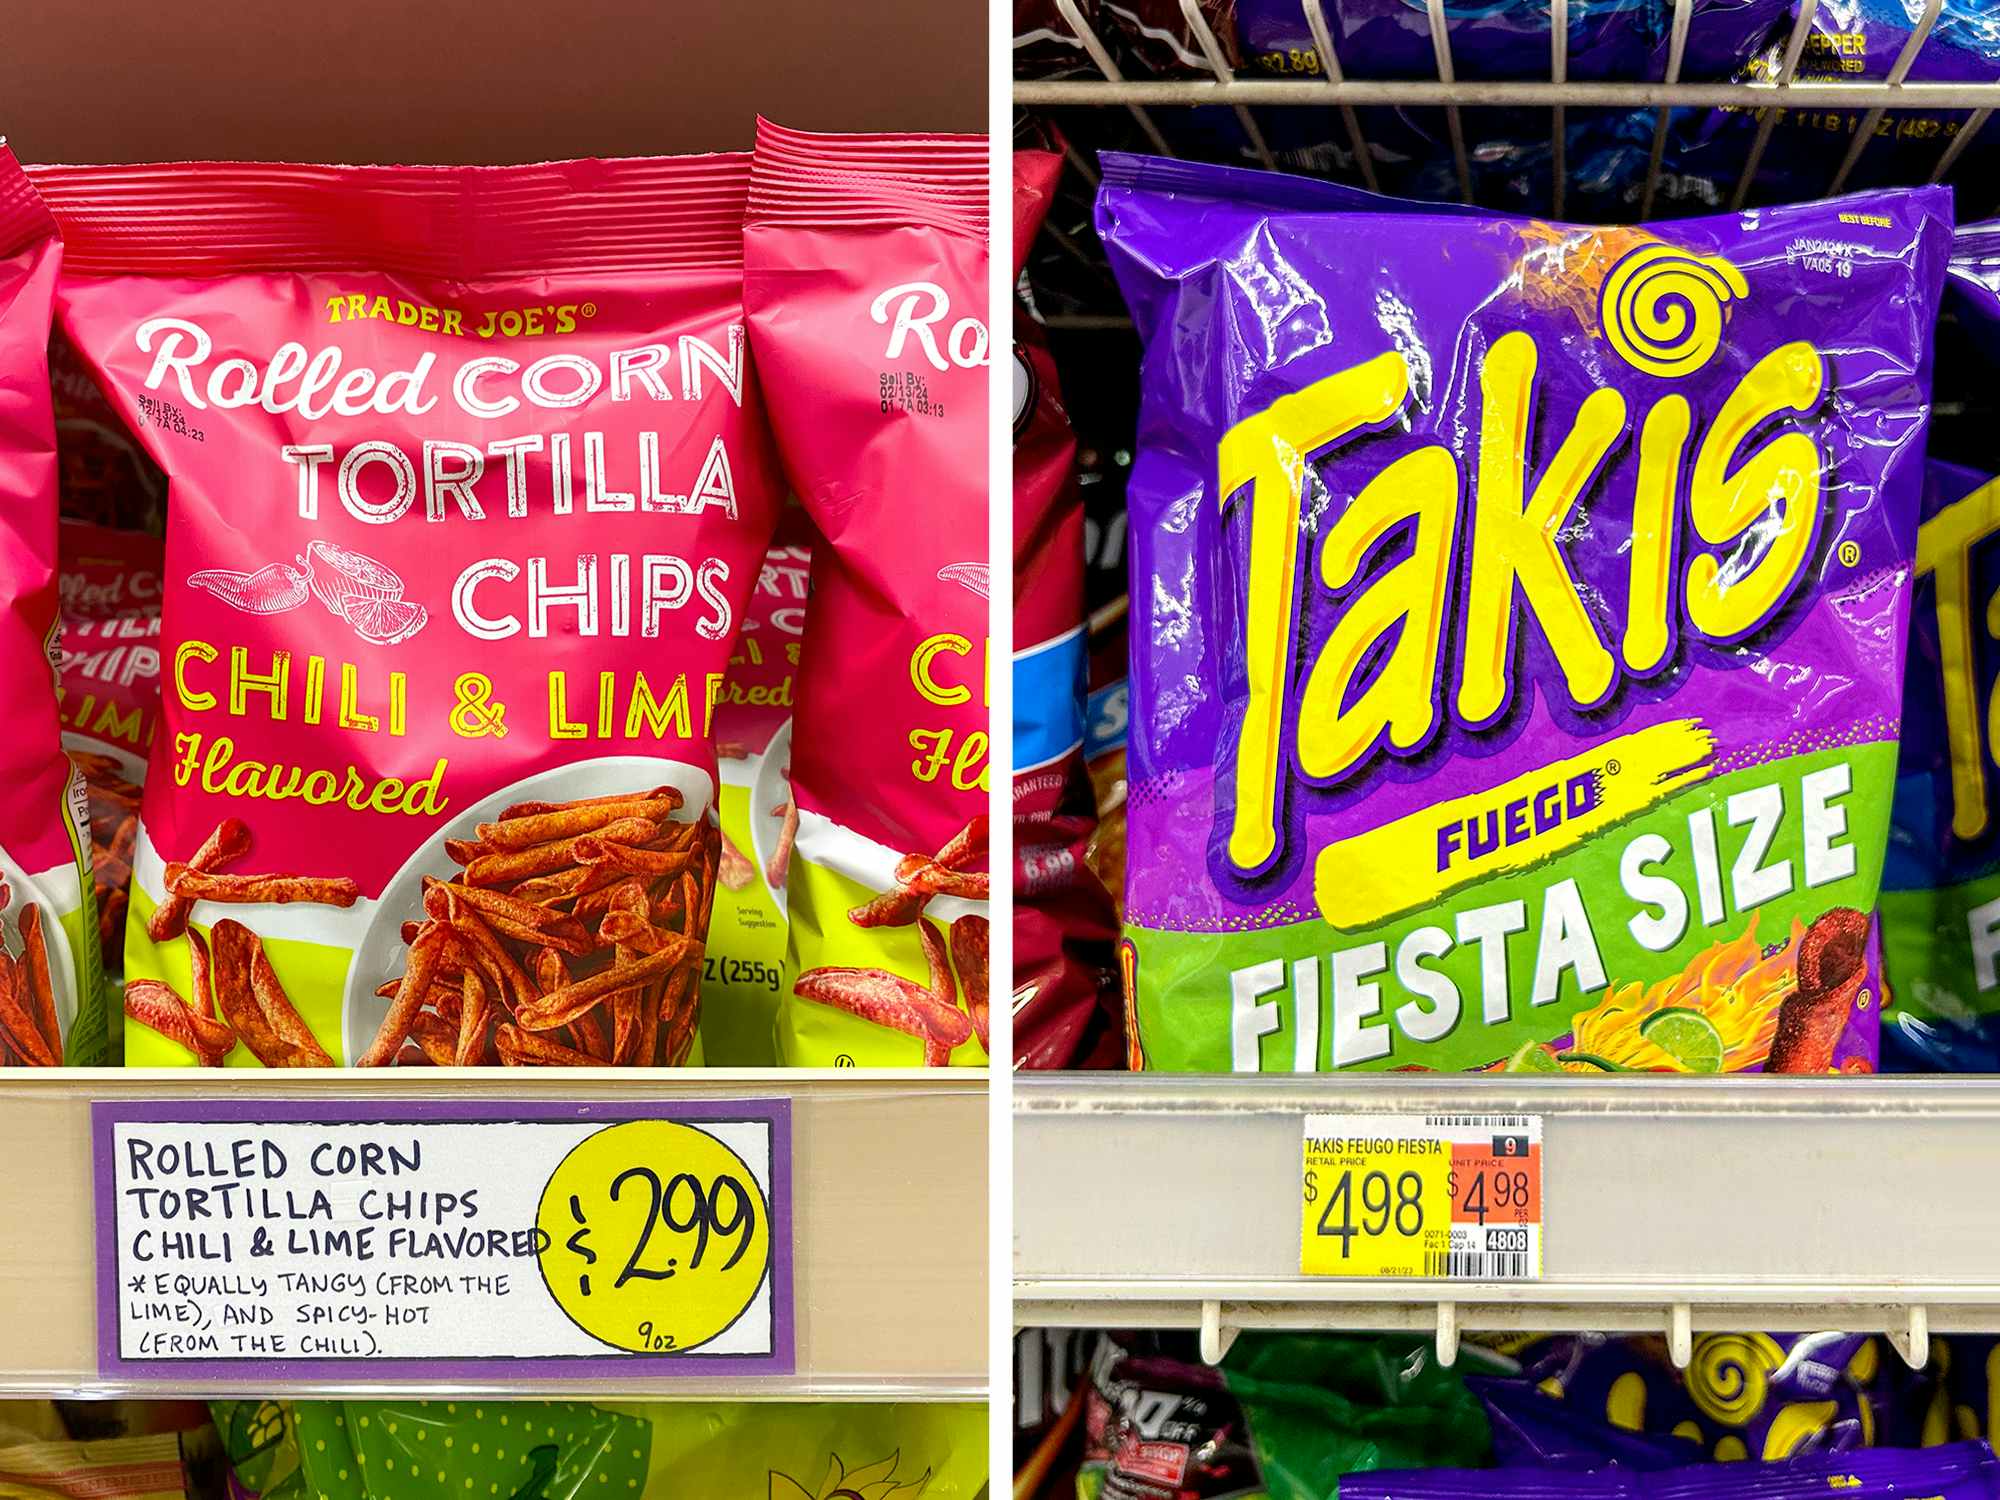 takis vs trader joes rolled corn tortilla chips price comparison